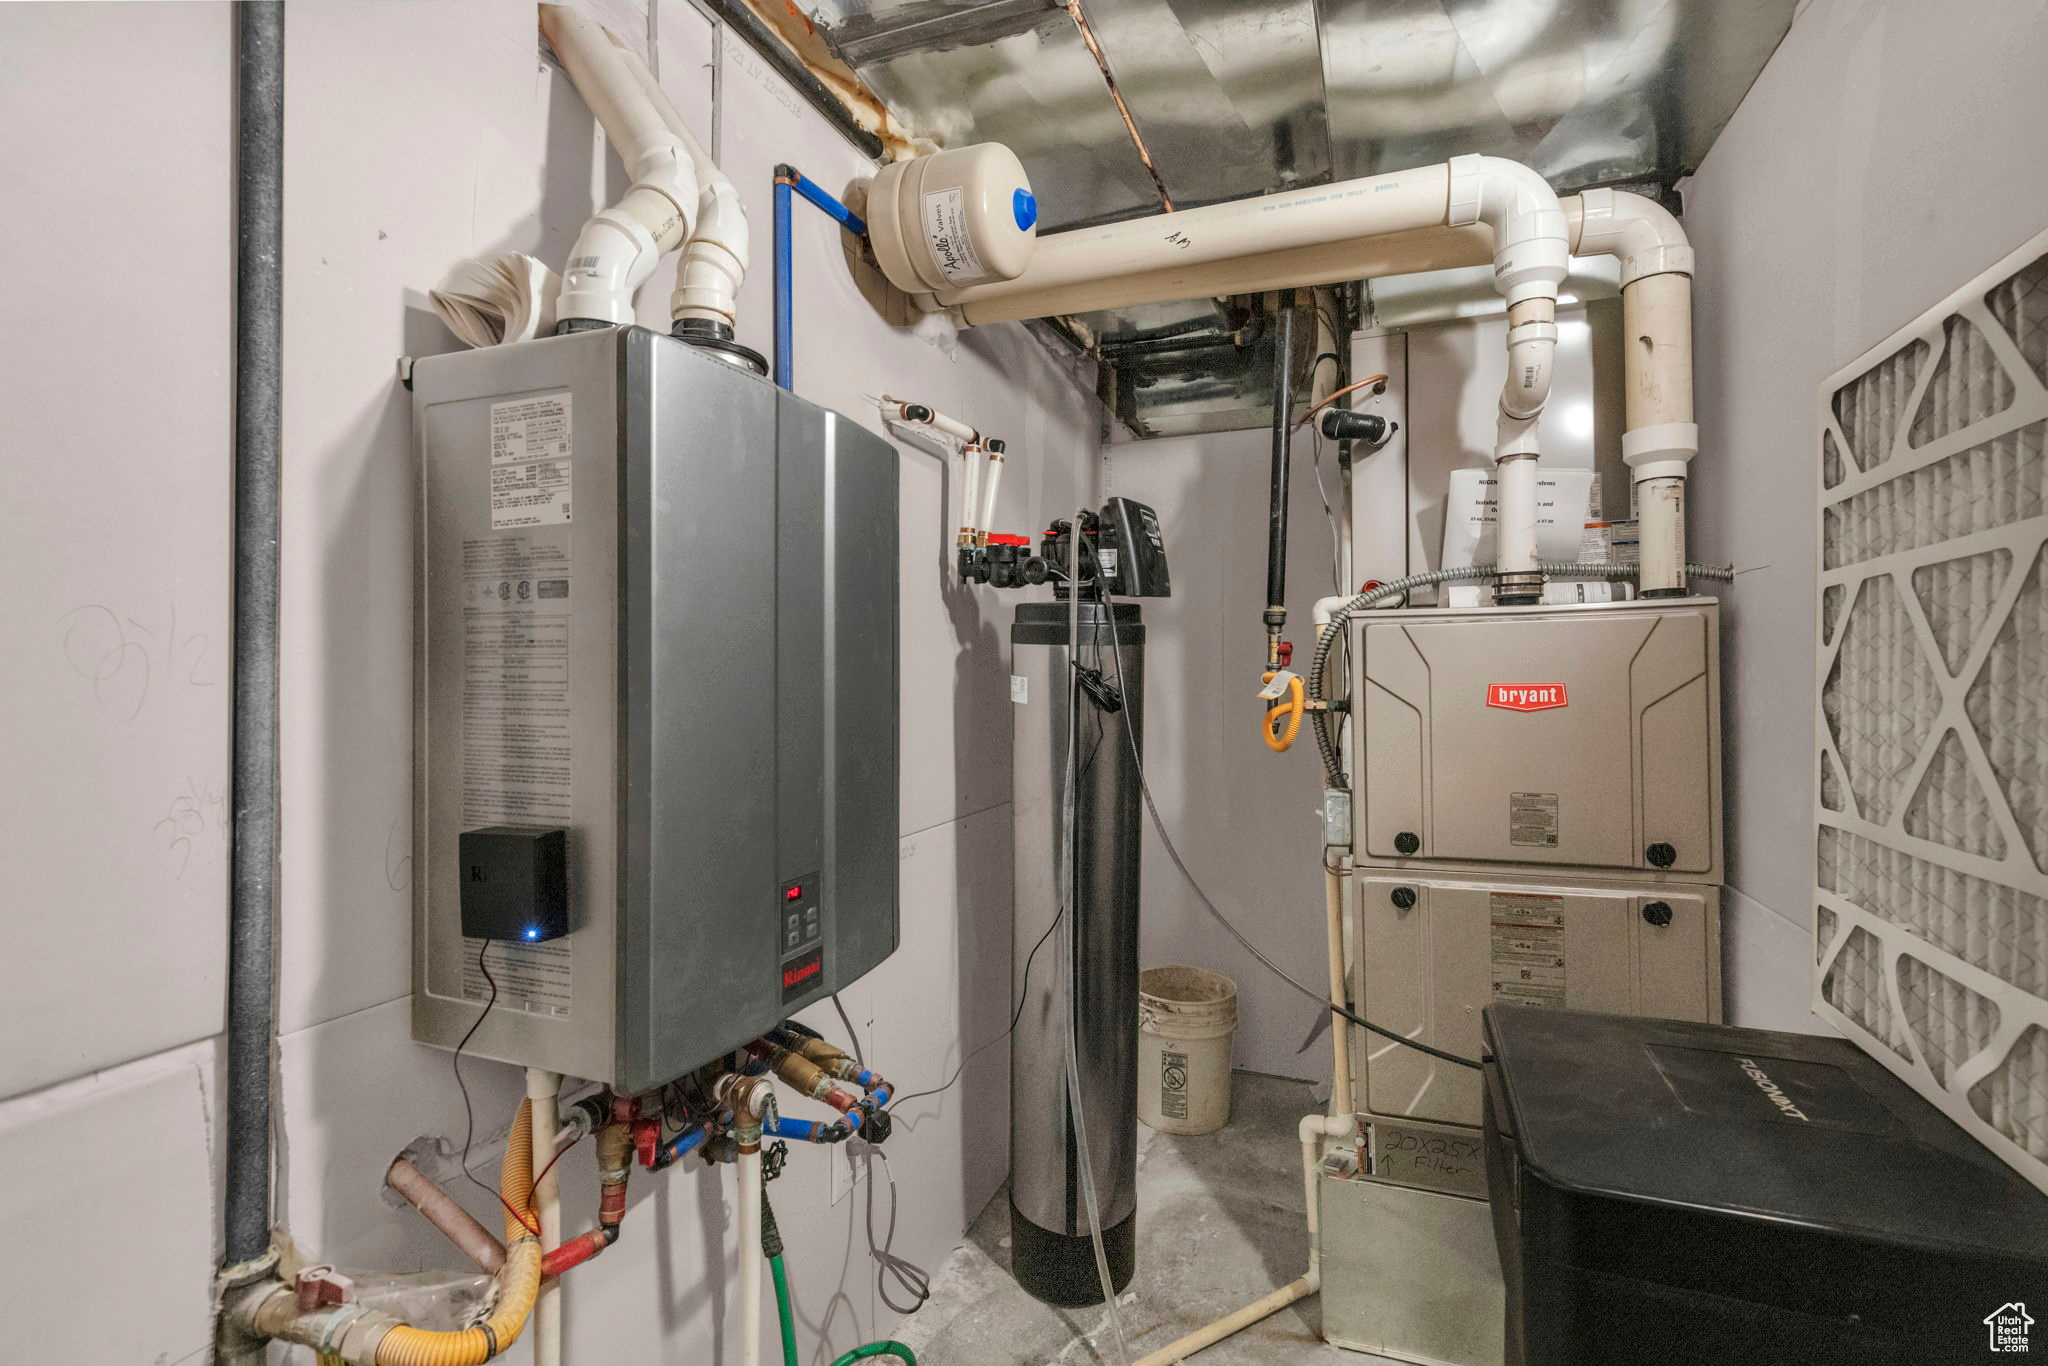 Natural gas furnace, on-demand water heater, and water softener